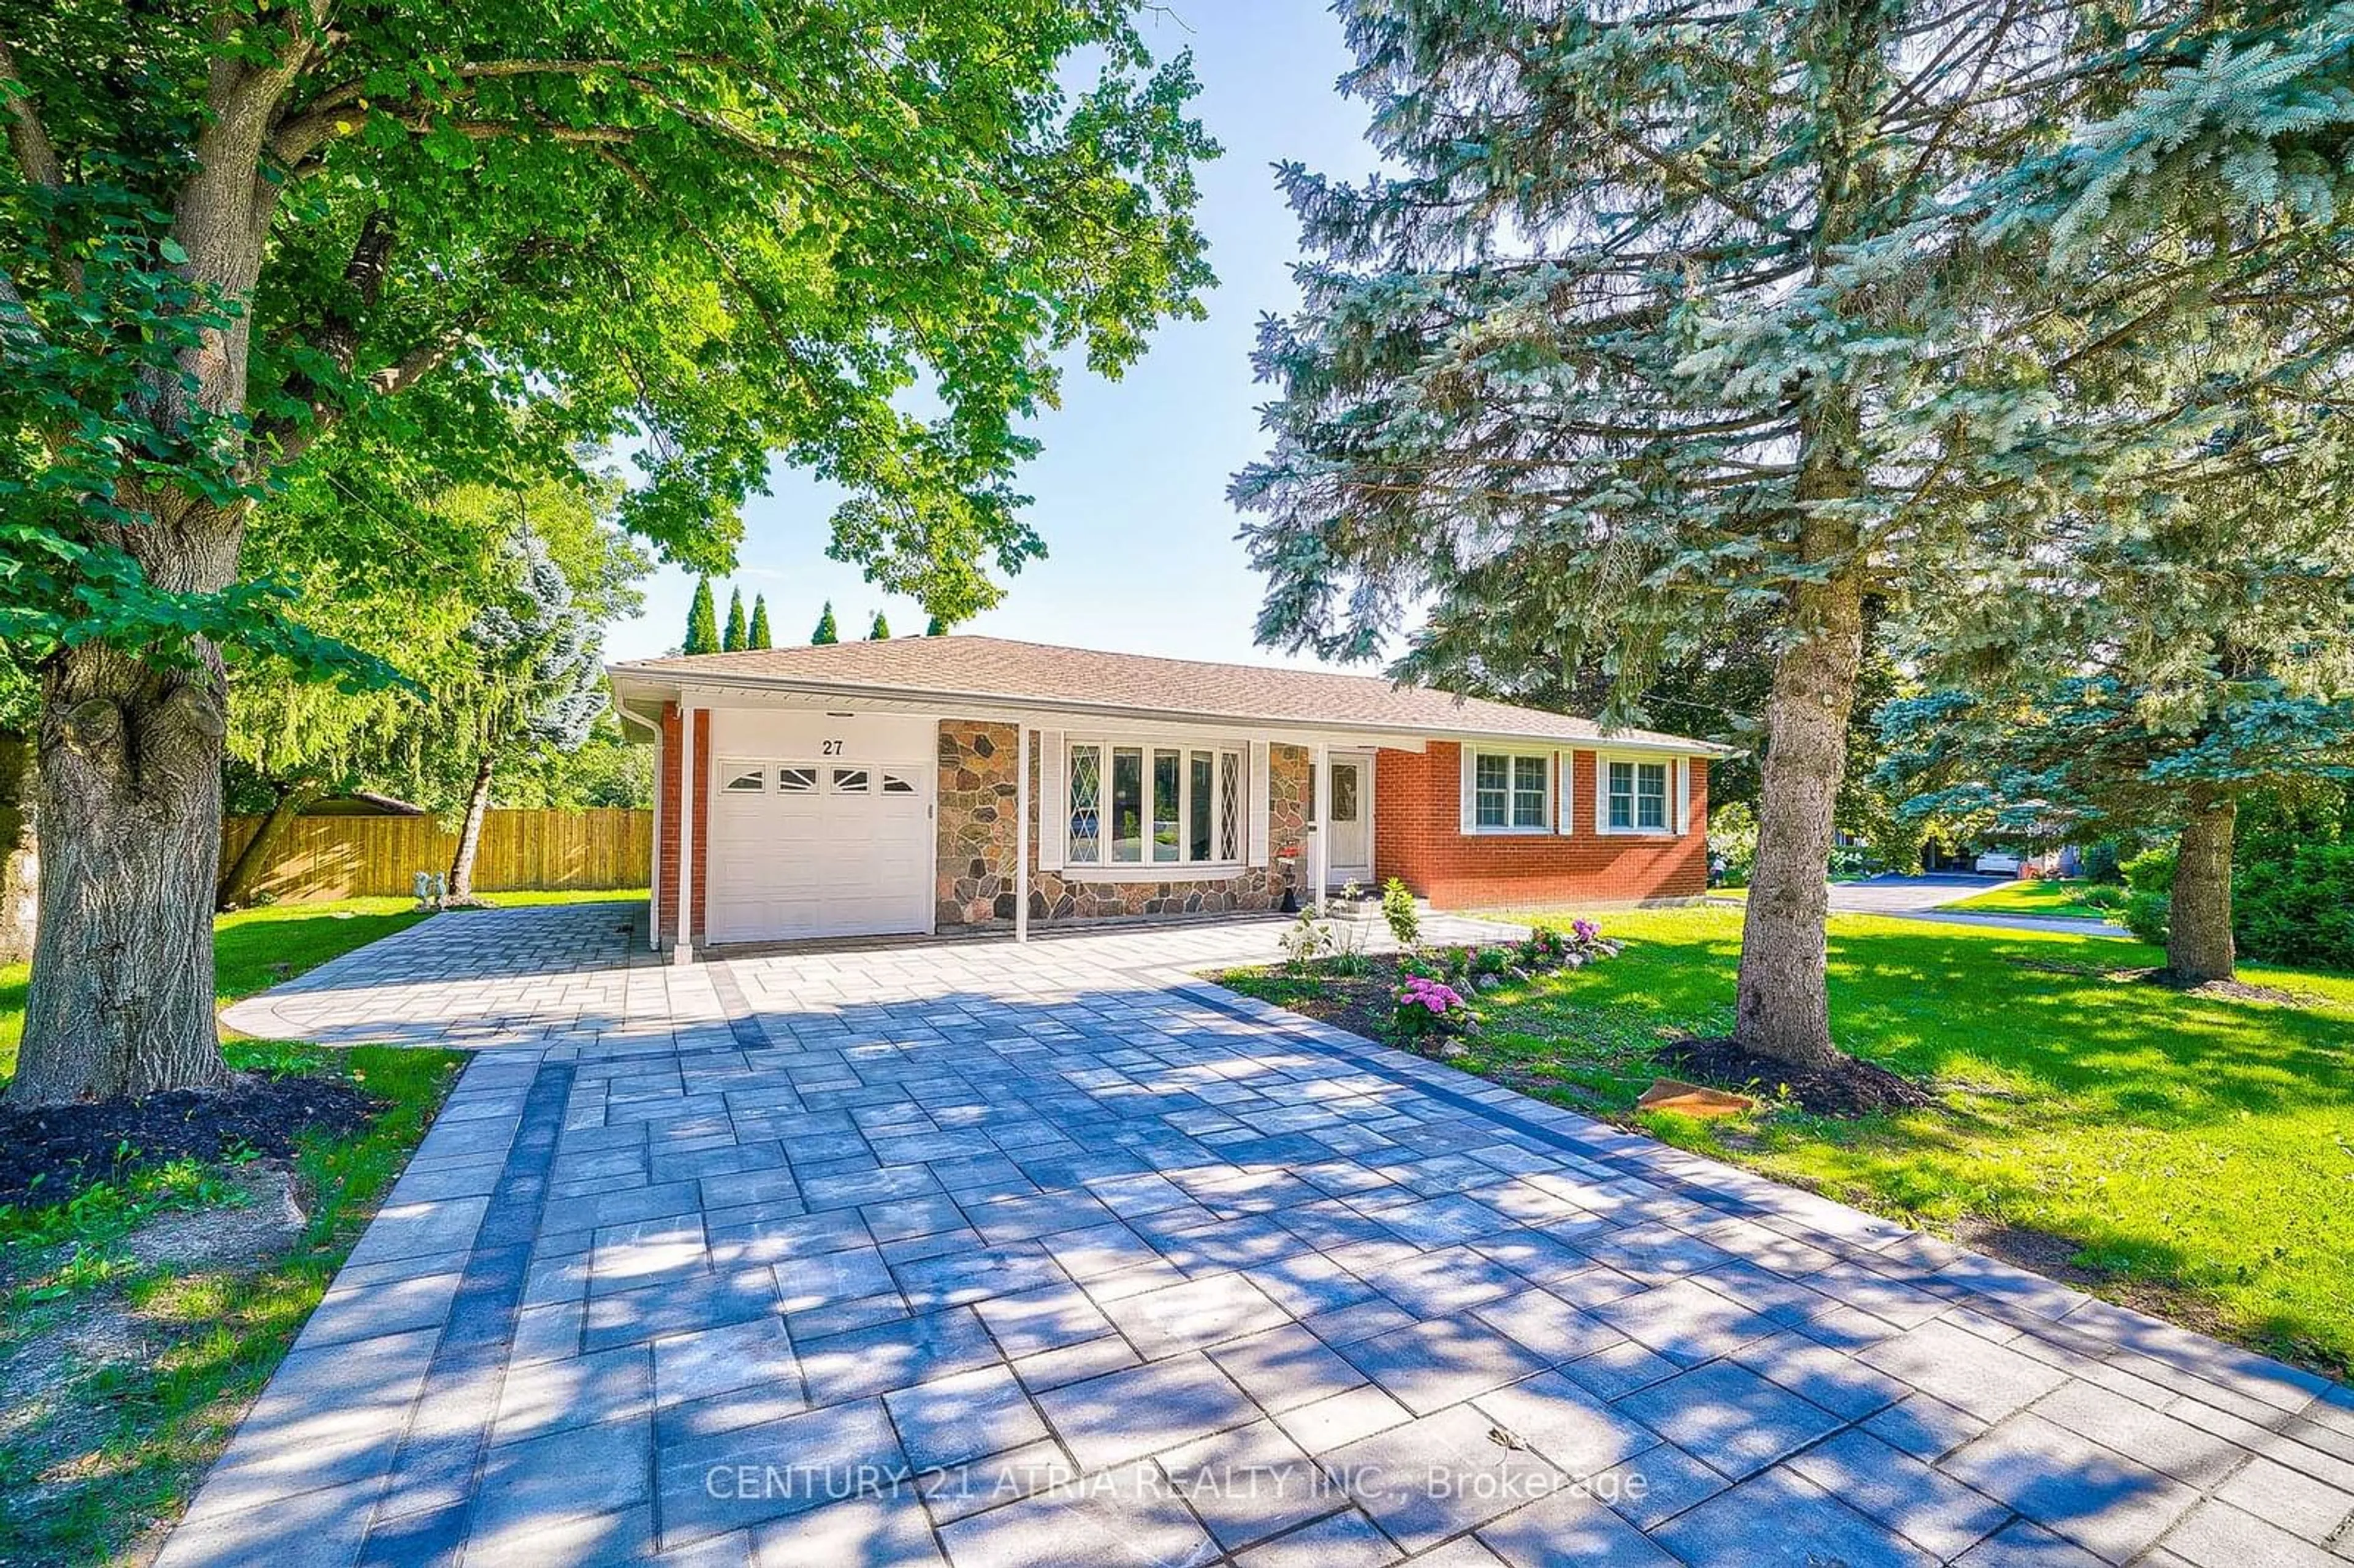 Home with brick exterior material for 27 Willowgate Dr, Markham Ontario L3P 1G4